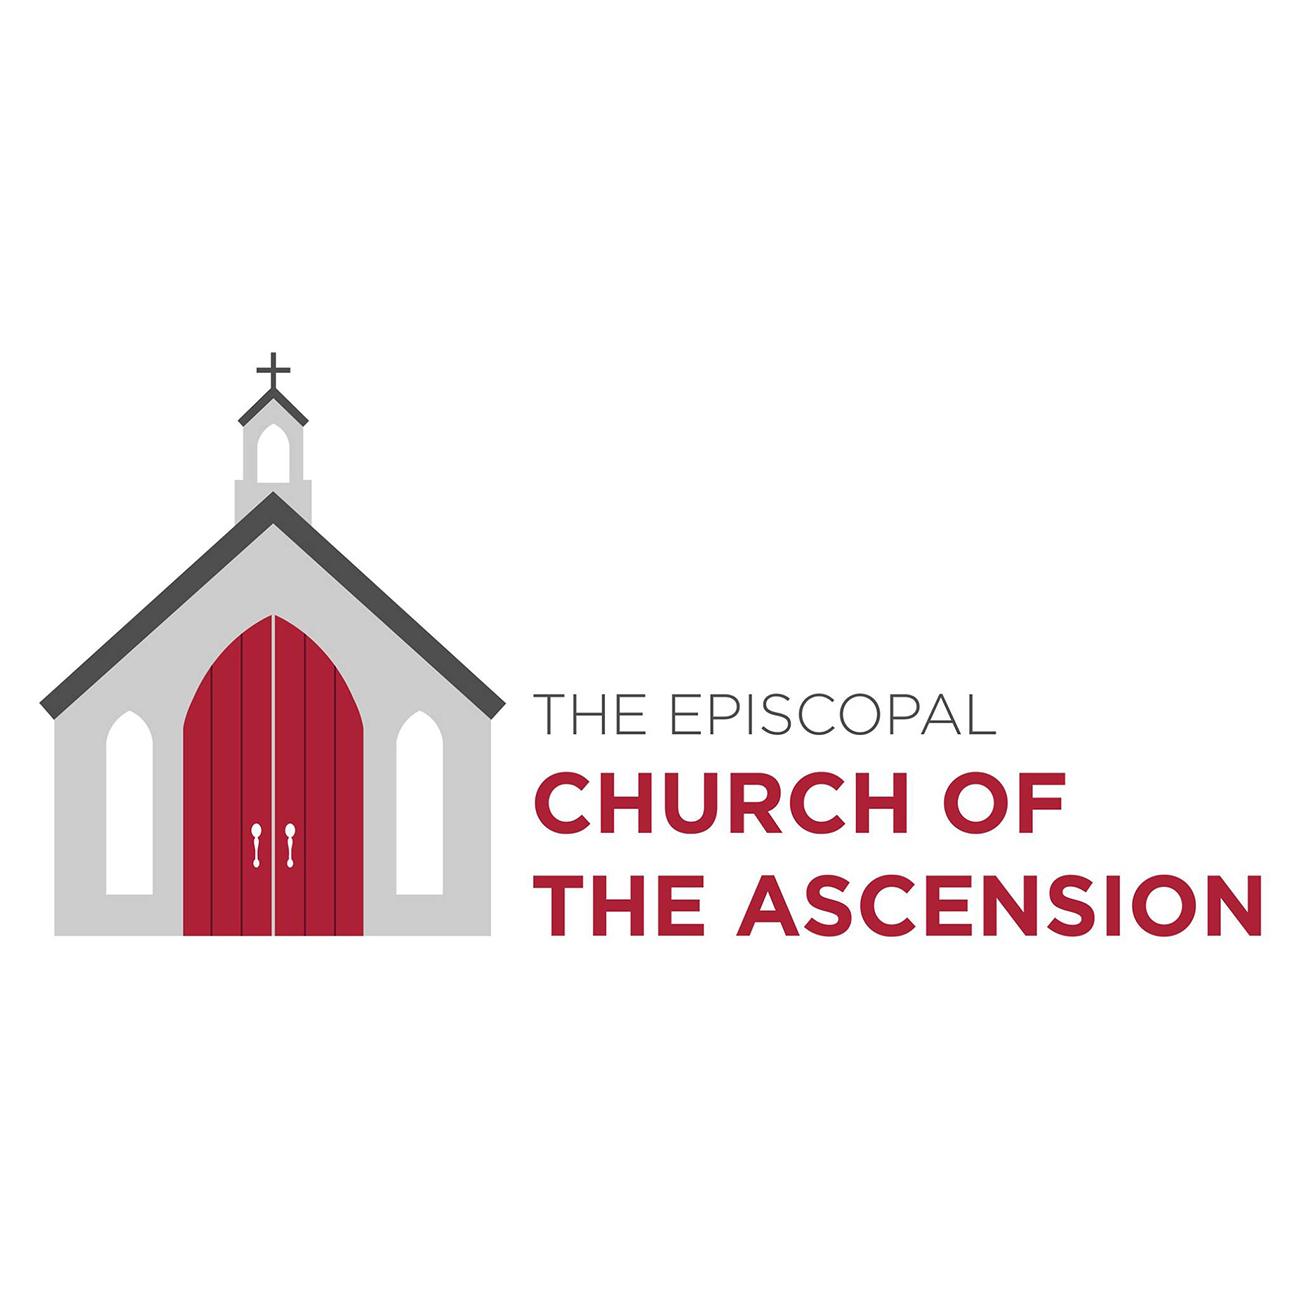 The Episcopal Church of the Ascension Logo Design